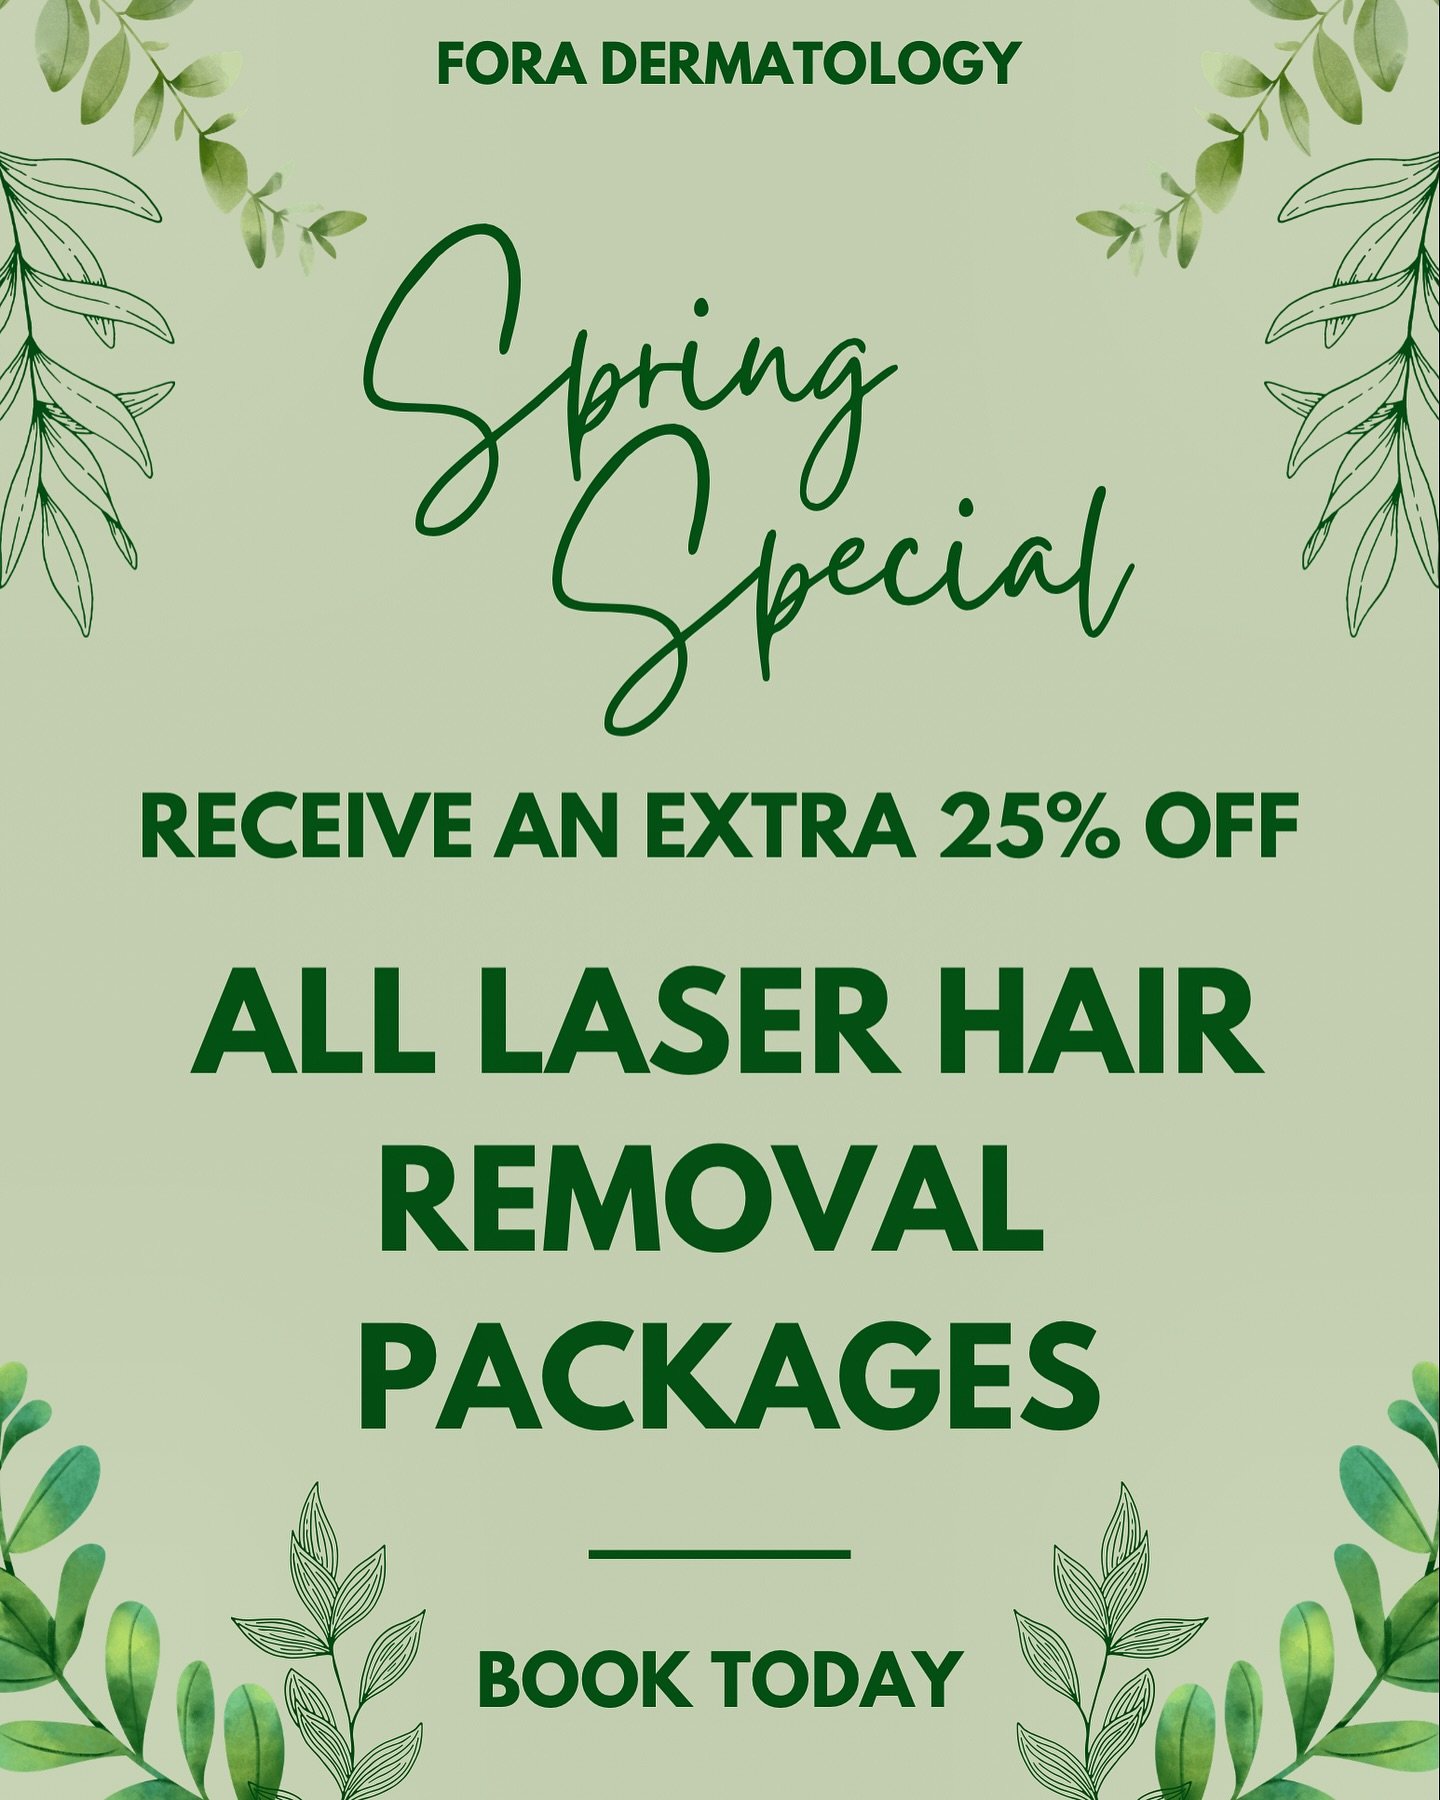 Say goodbye to your razor for good! ✨ 

Book today &amp; enjoy 25% off on laser hair removal treatments. Don&rsquo;t miss out on this limited time offer to achieve your hair free goals 🙌
ENDS 5/31/24

#LaserHairRemoval #SmoothSkin #HairFree #Special